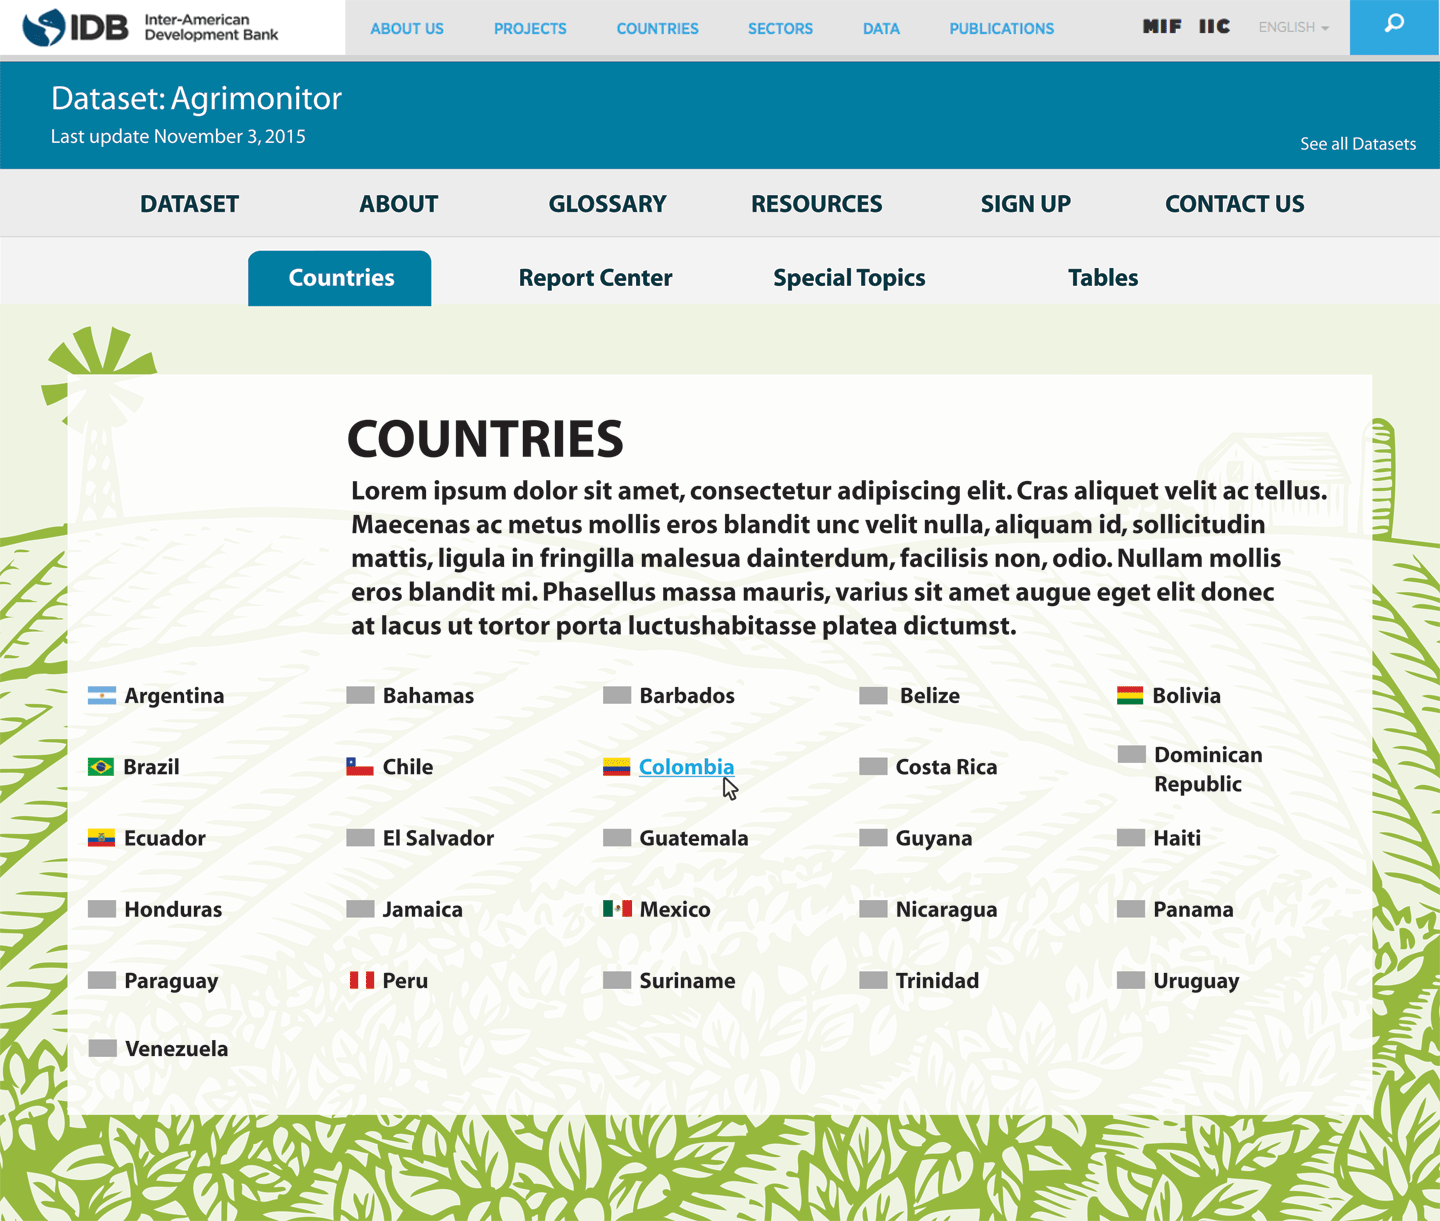 Country Page - Agrimonitor Project - IDB